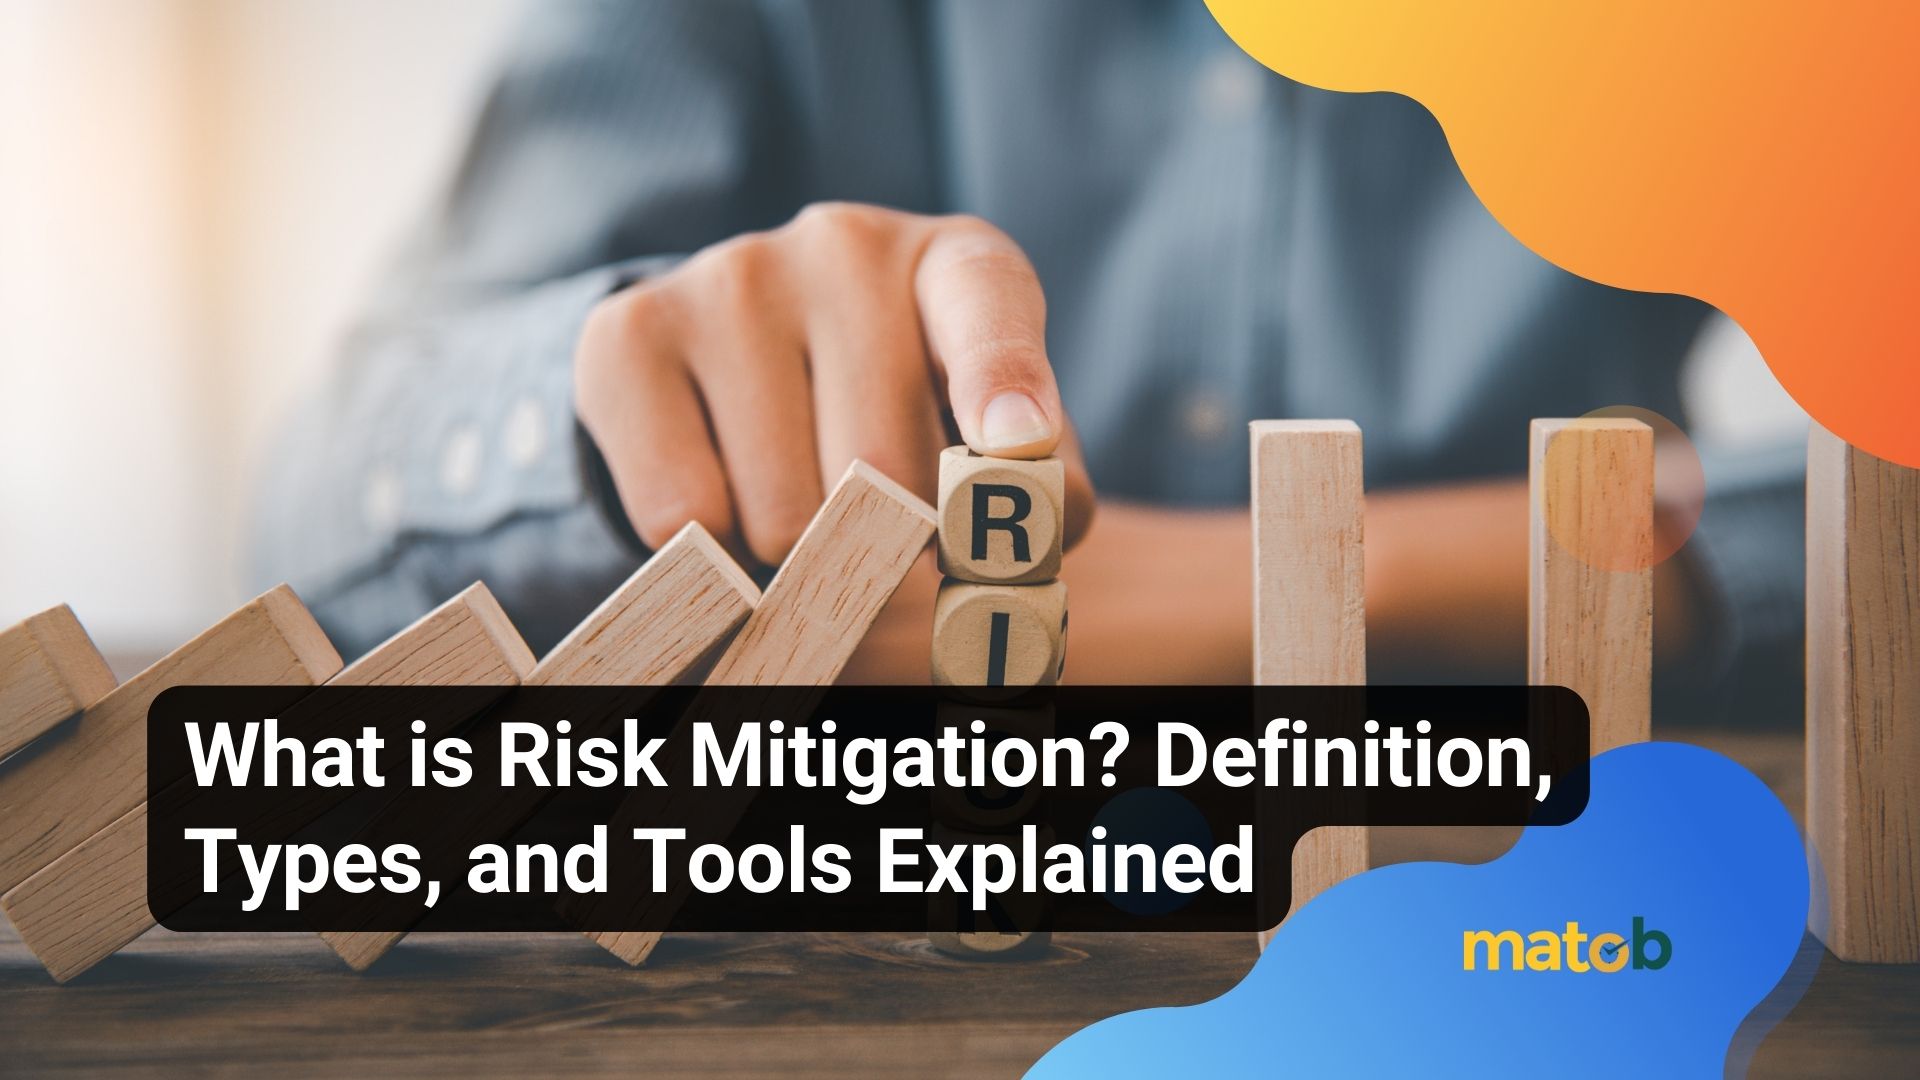 What is Risk Mitigation? Definition, Types, and Tools Explained